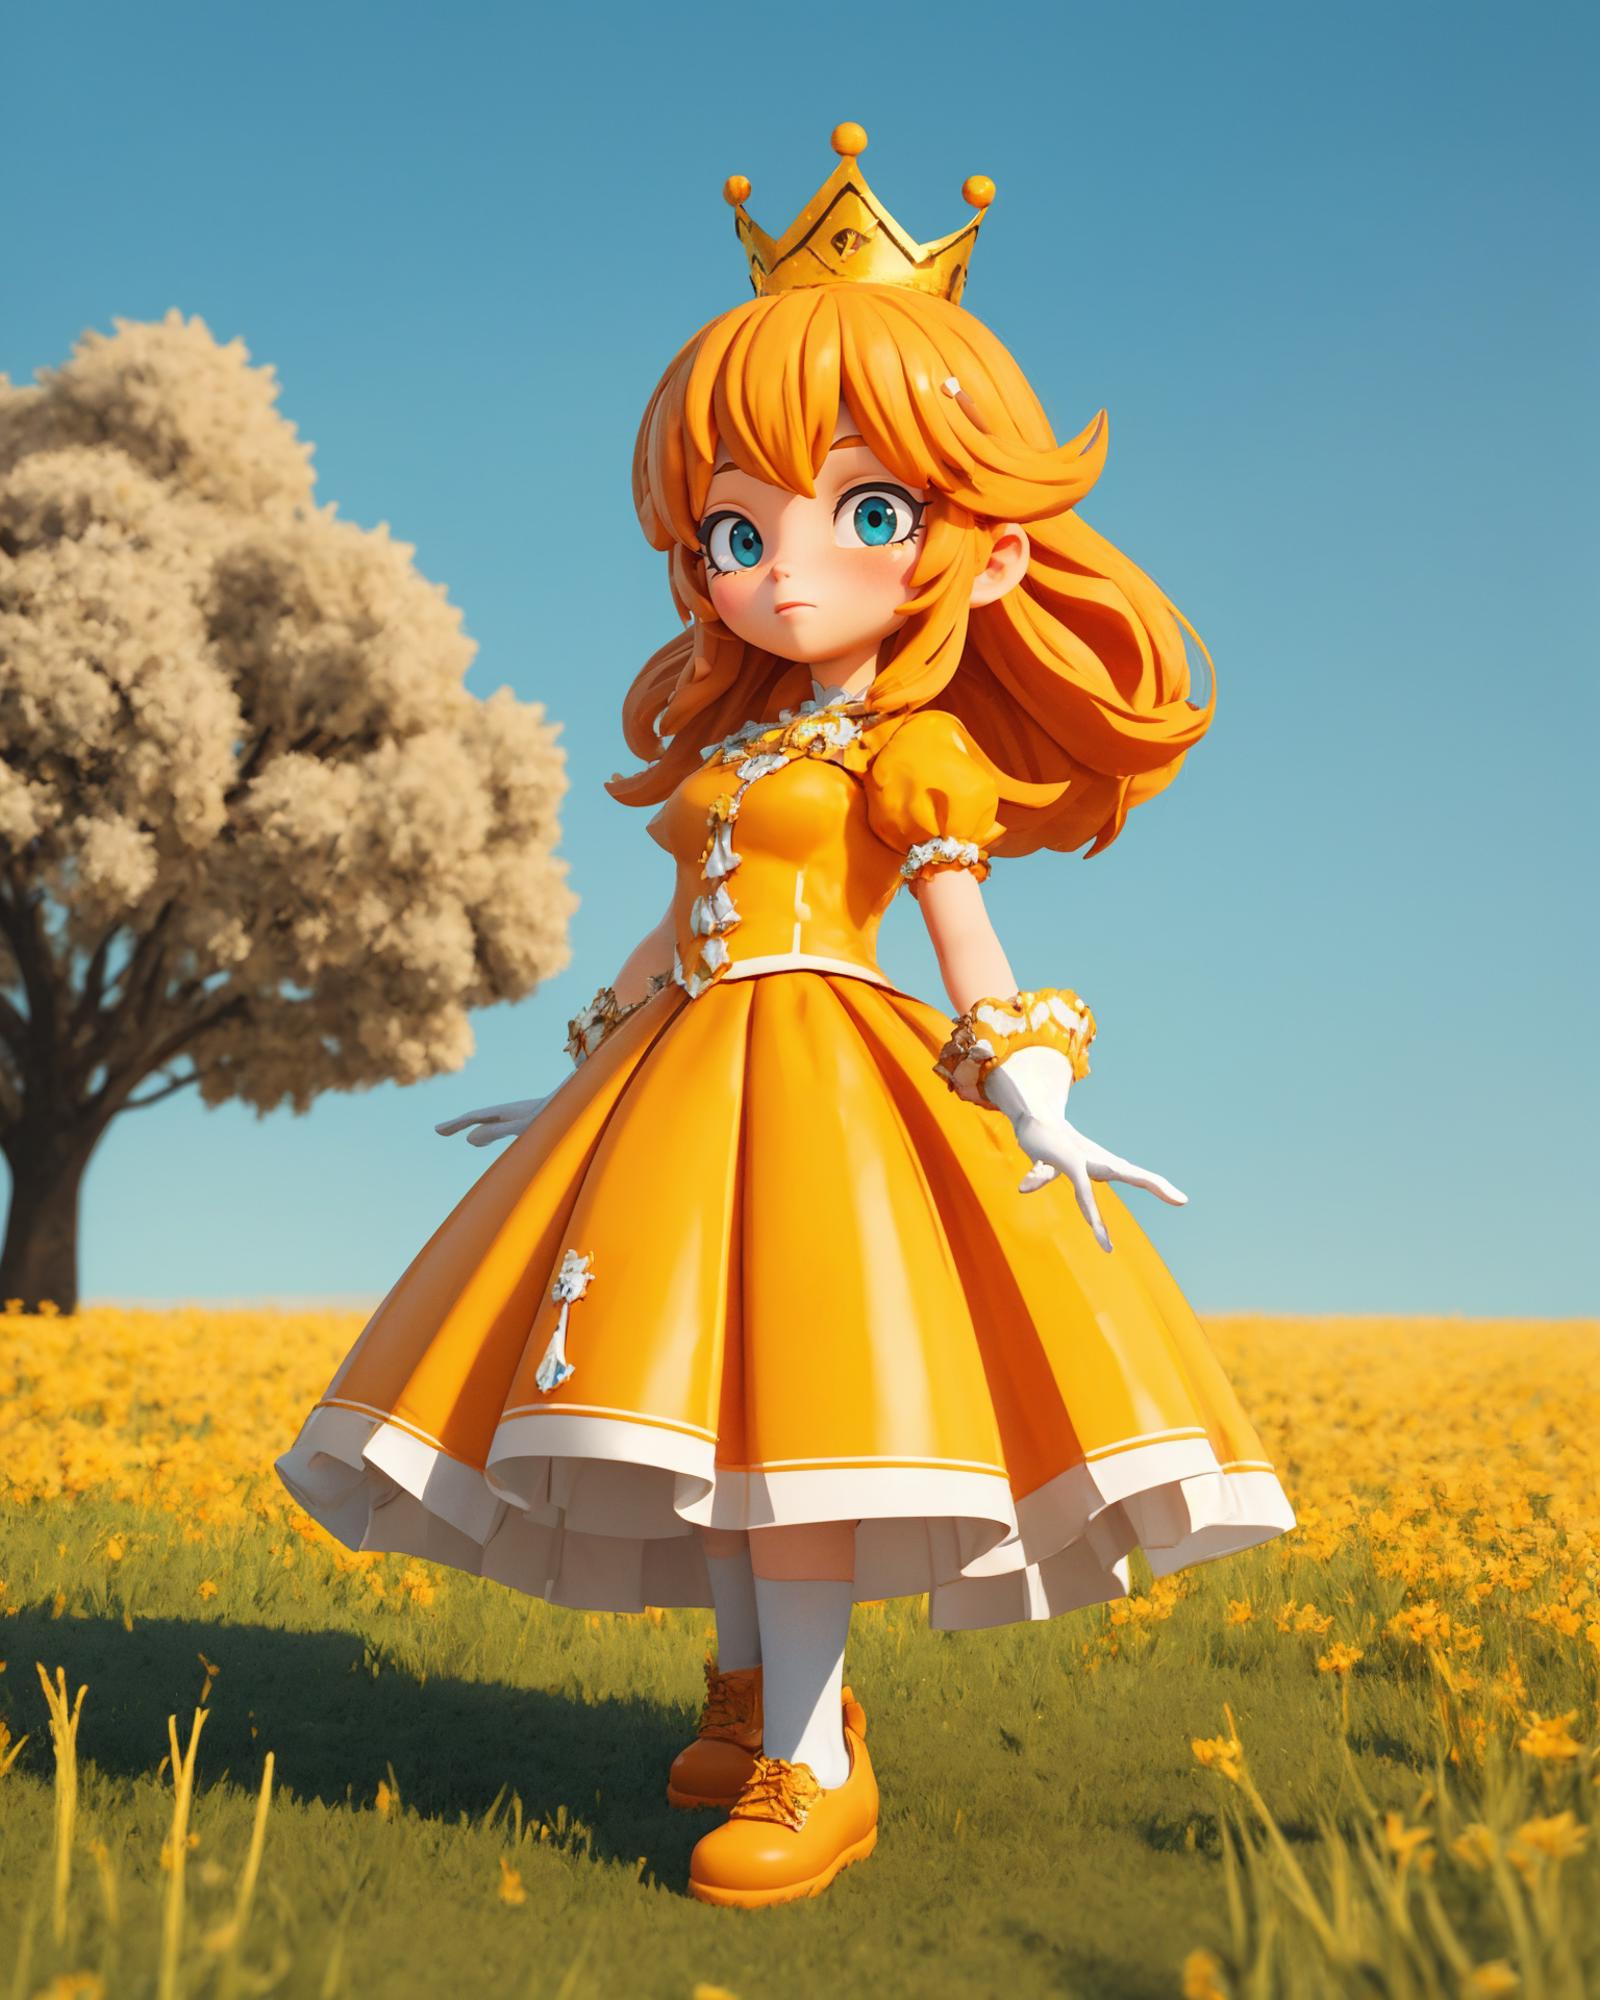 A 3D model of a princess with a yellow dress and a crown, standing in a field of flowers.